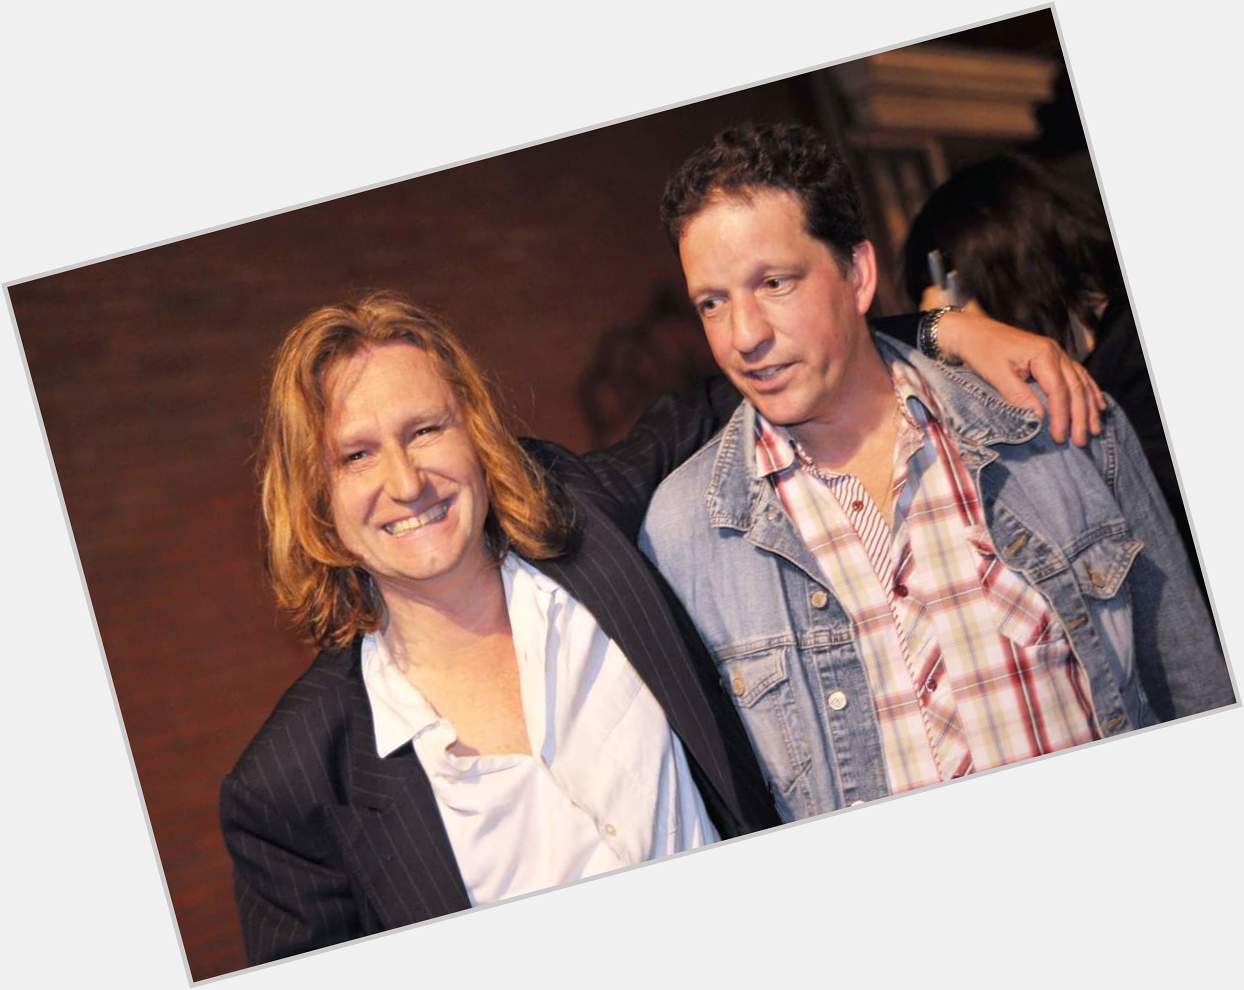 Happy birthday john waite
4th of july
Another meet and greet in the netherlands 